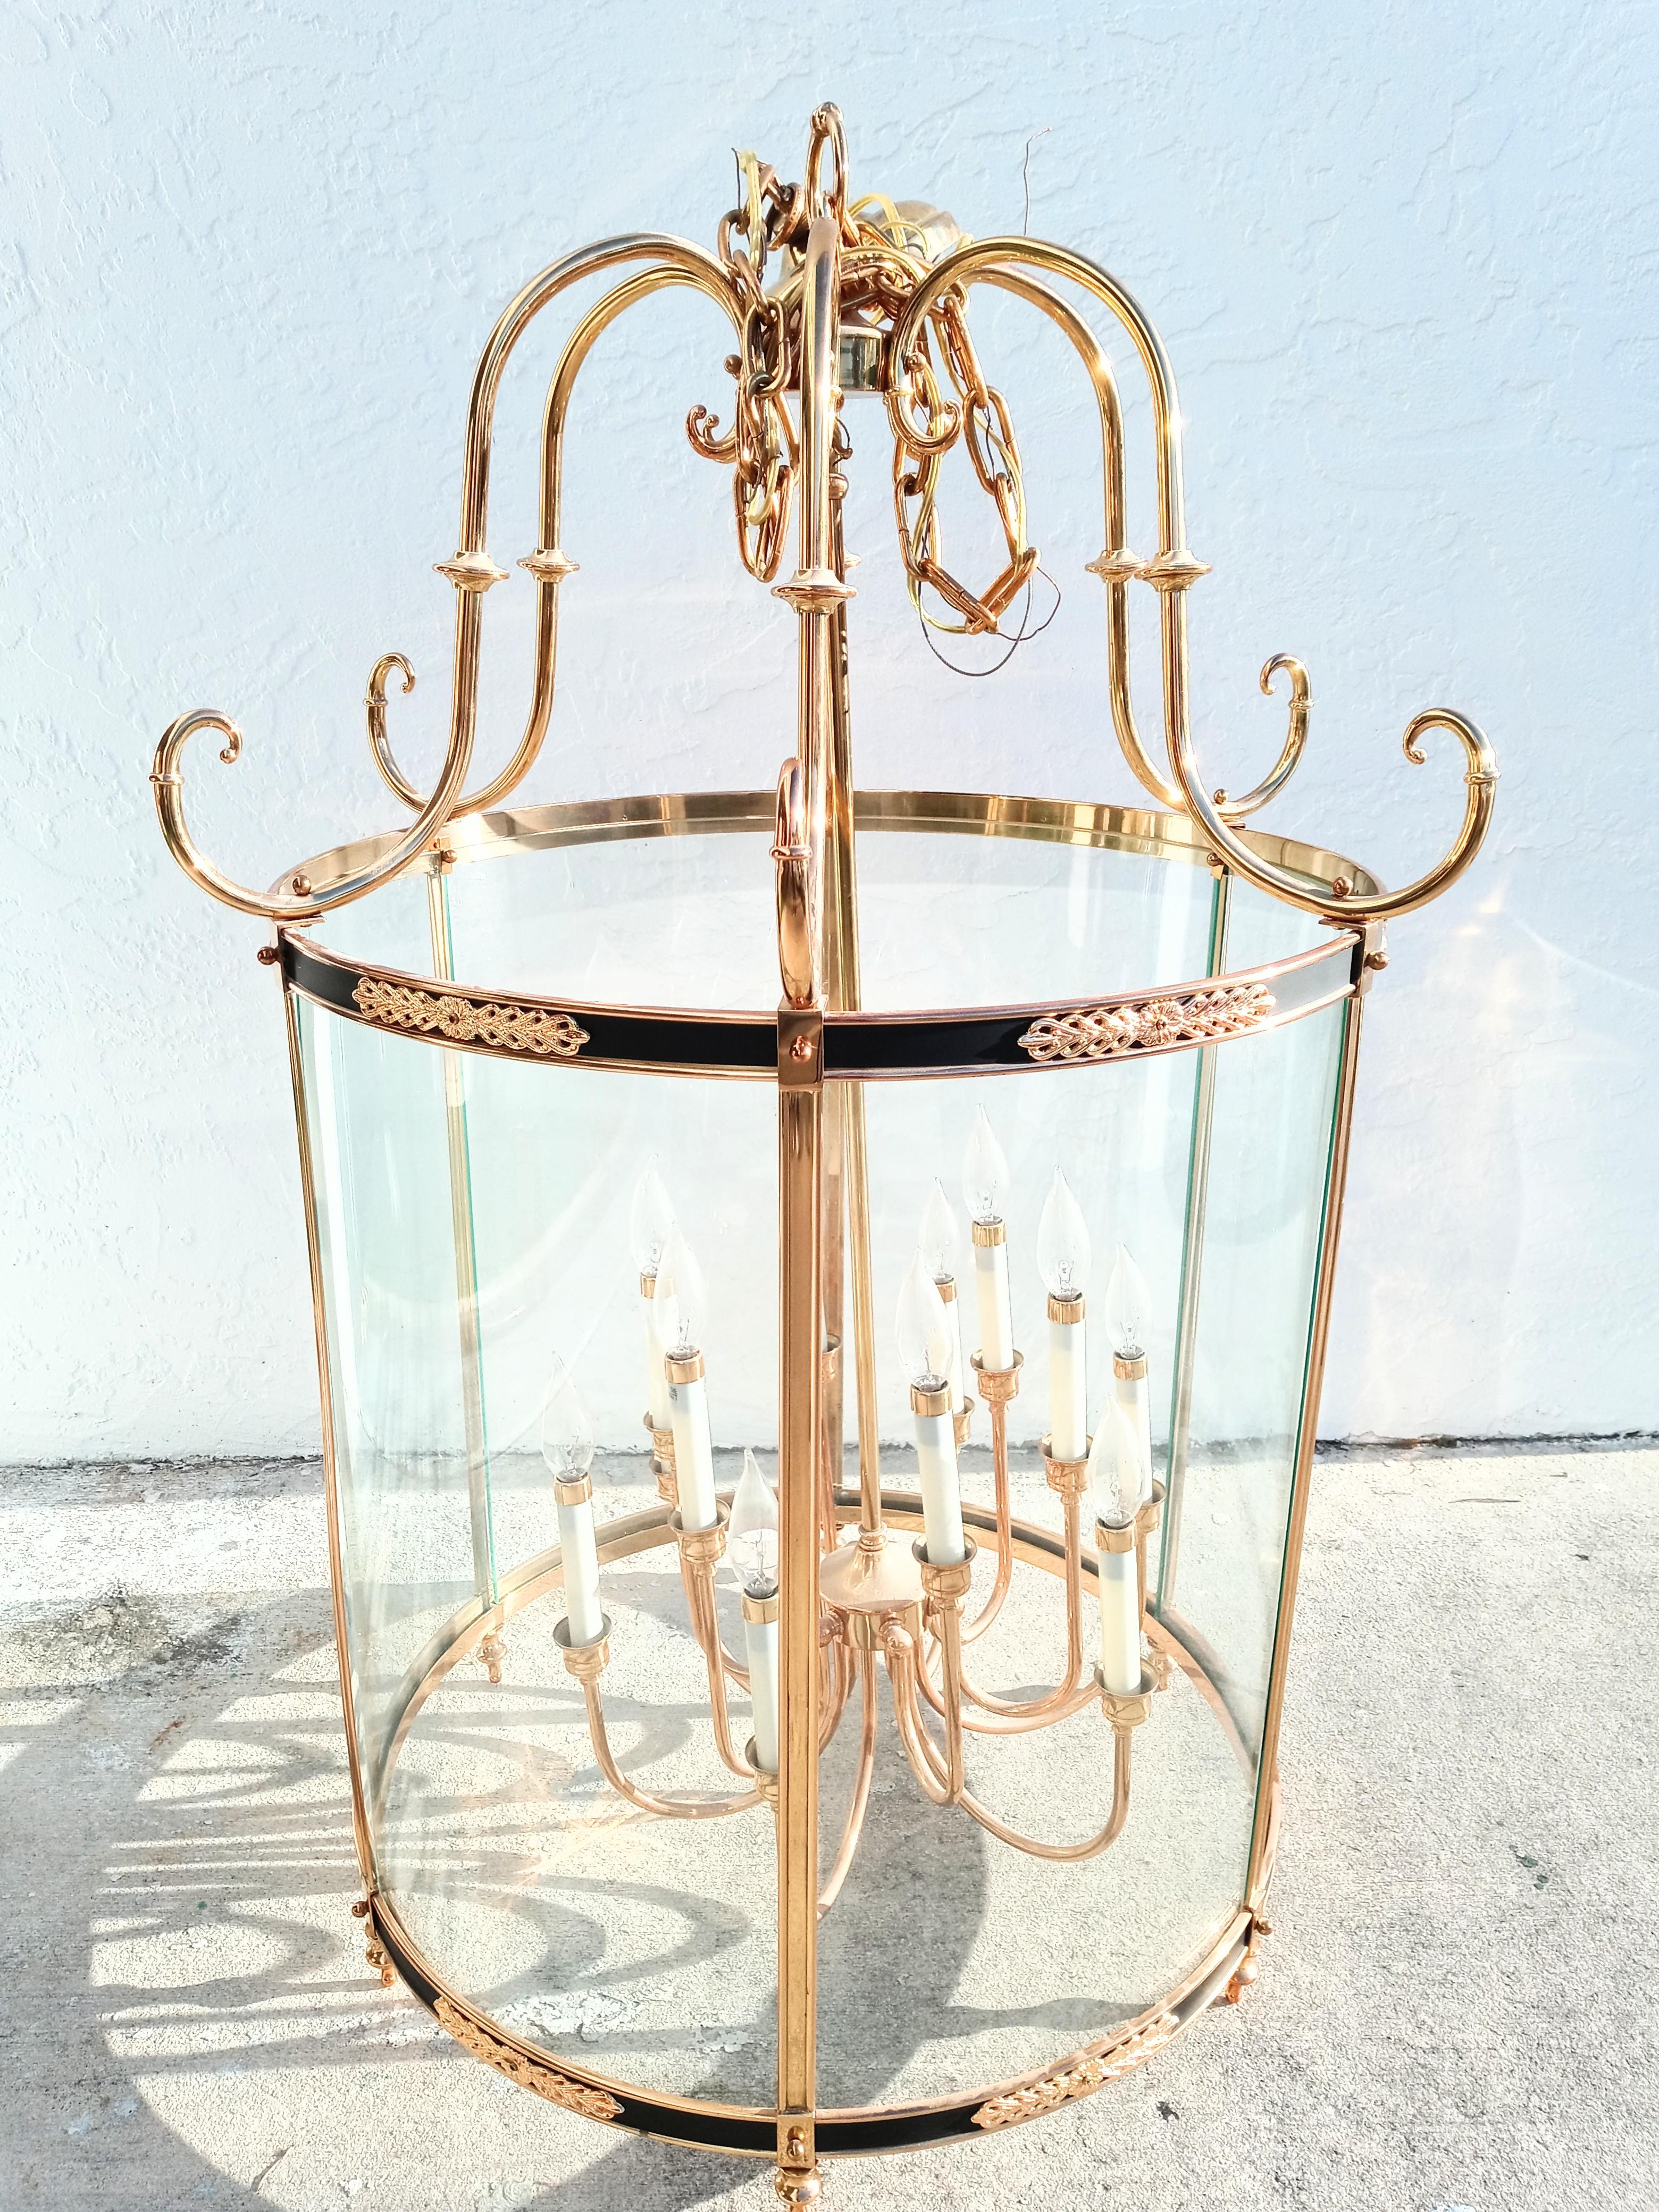 Federal Monumental Traditional Brass Curved Glass 12 Light Foyer Cylindrical Chandelier For Sale